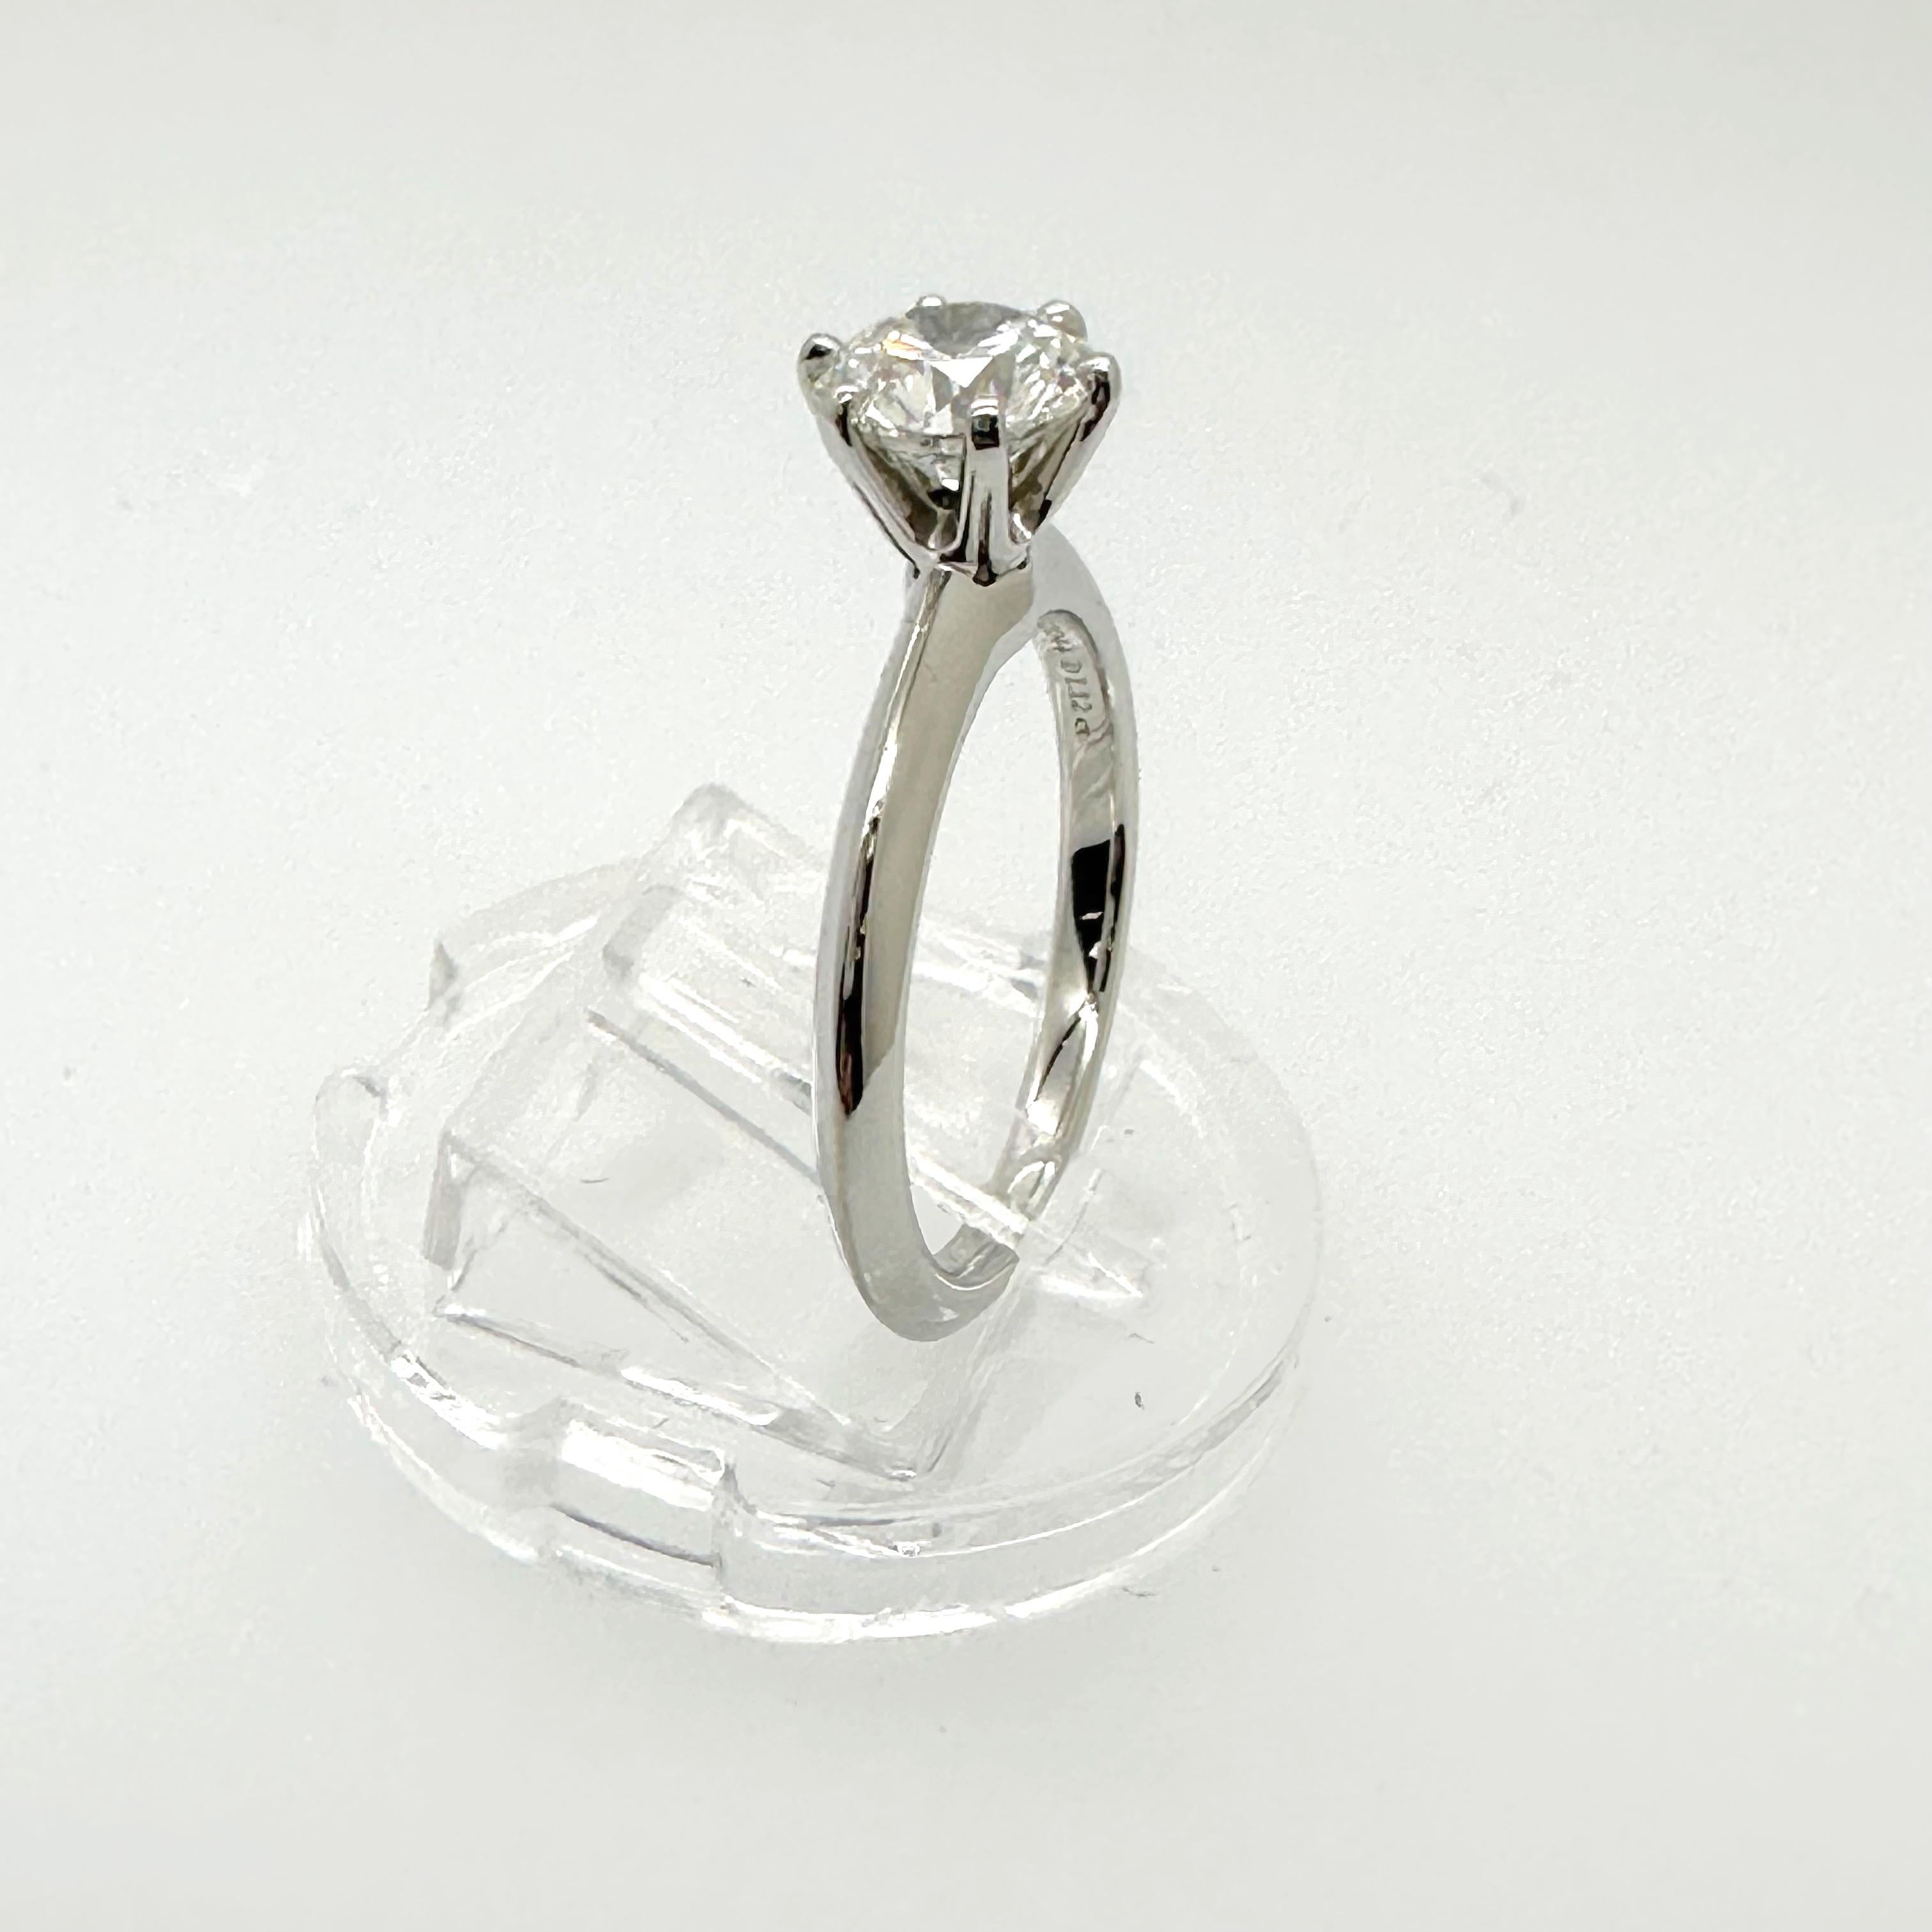 Tiffany & Co. Round Diamond 1.12 CTS G VS1 Solitaire Engagement Ring COA Box For Sale 10